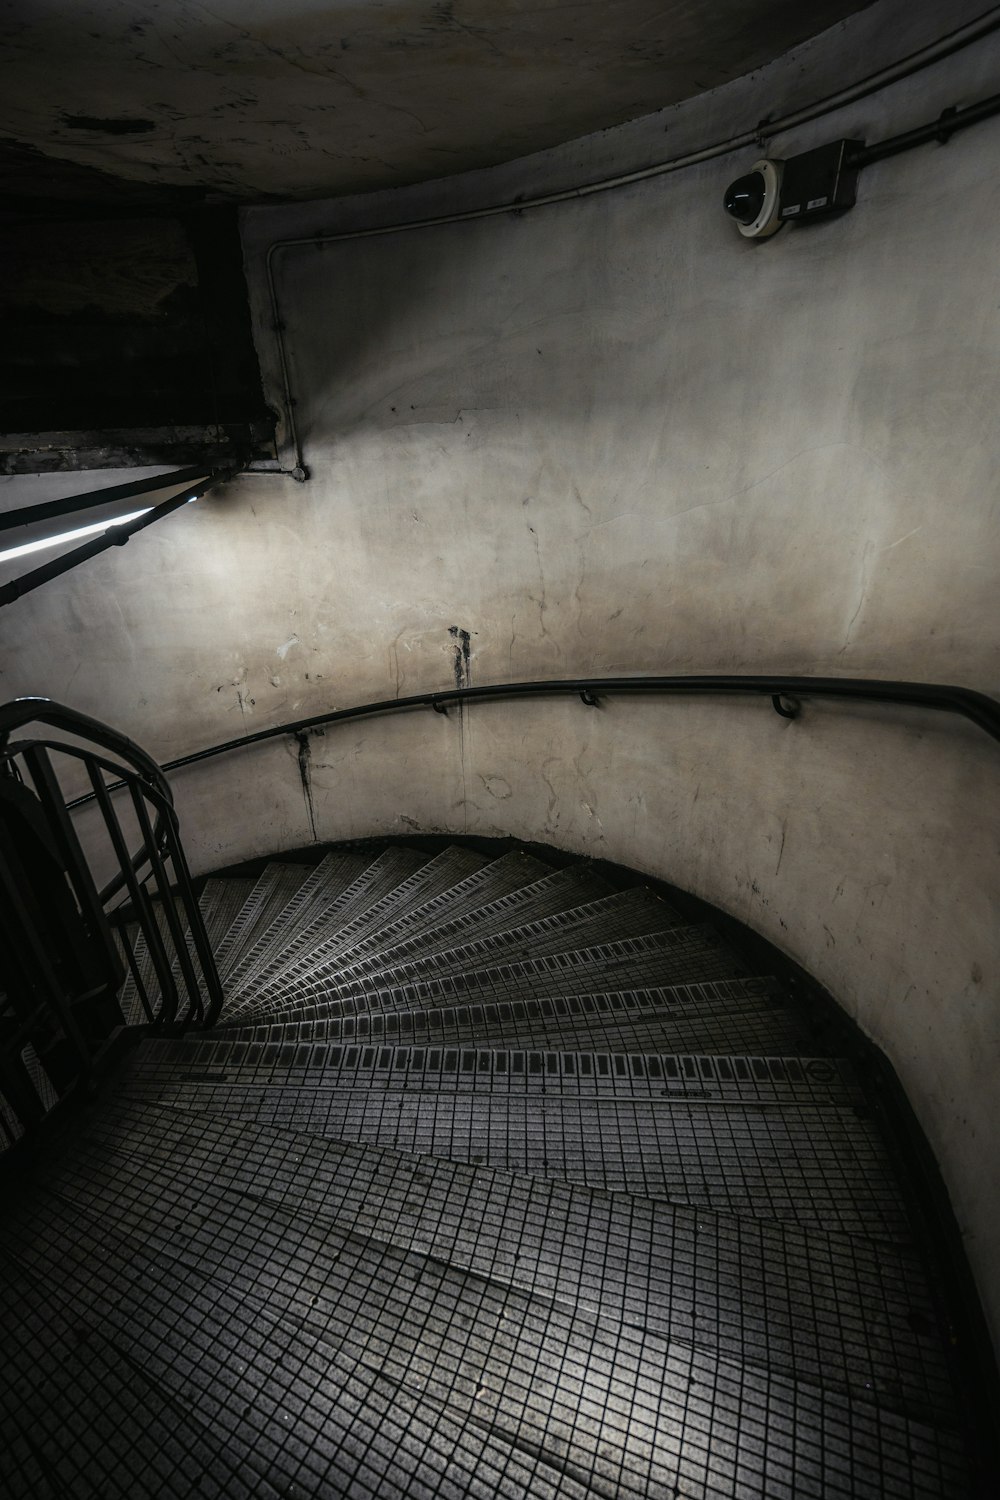 a spiral staircase in a building with a metal railing